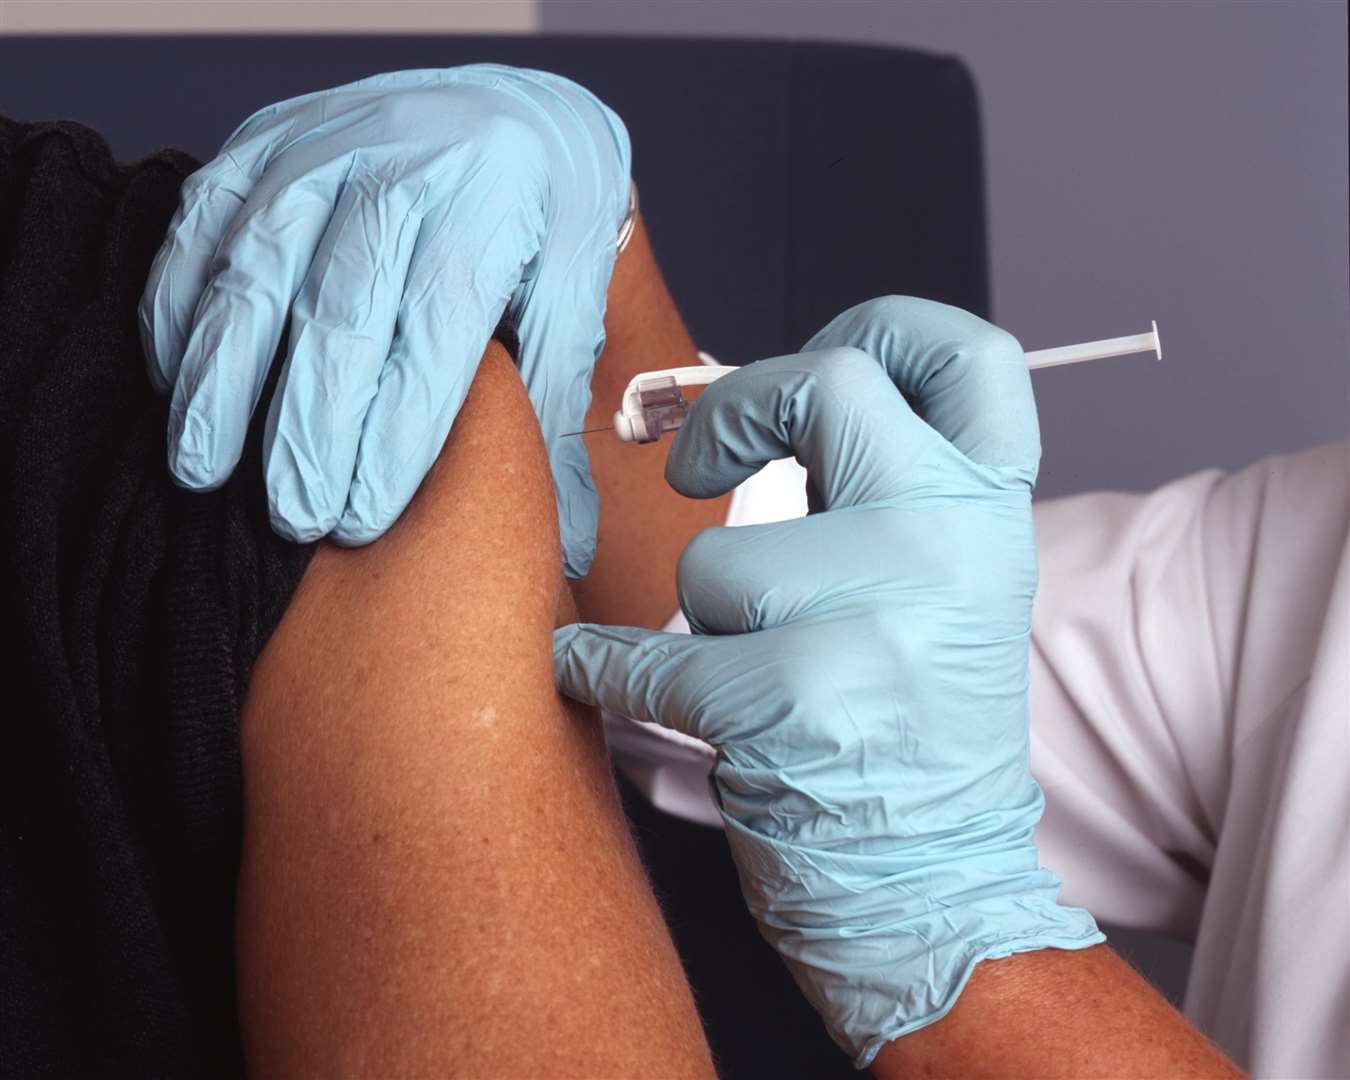 Most young people haven't had the vaccine yet